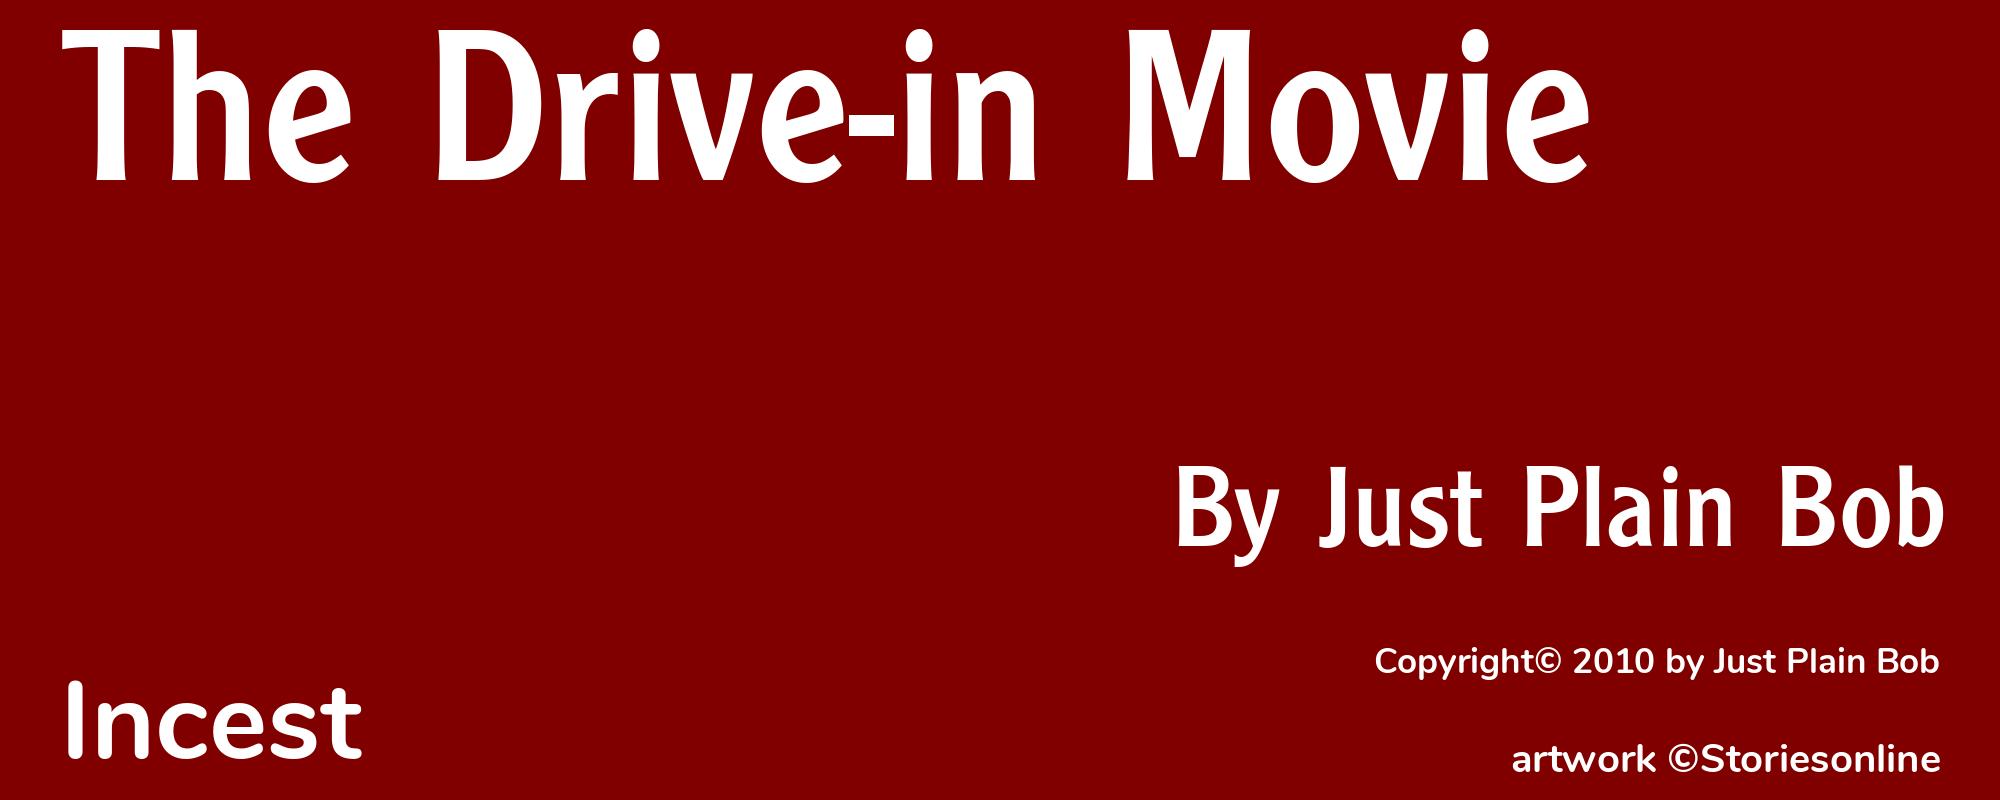 The Drive-in Movie - Cover